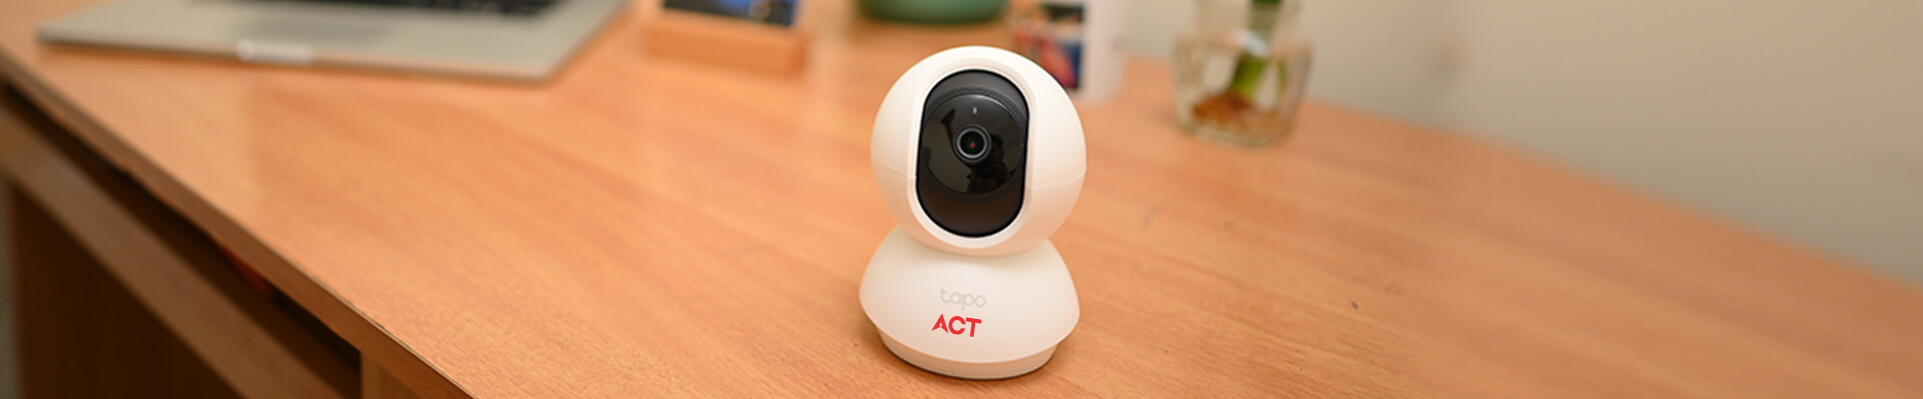 ACT HomeCam Subscription and Self Installation Guide